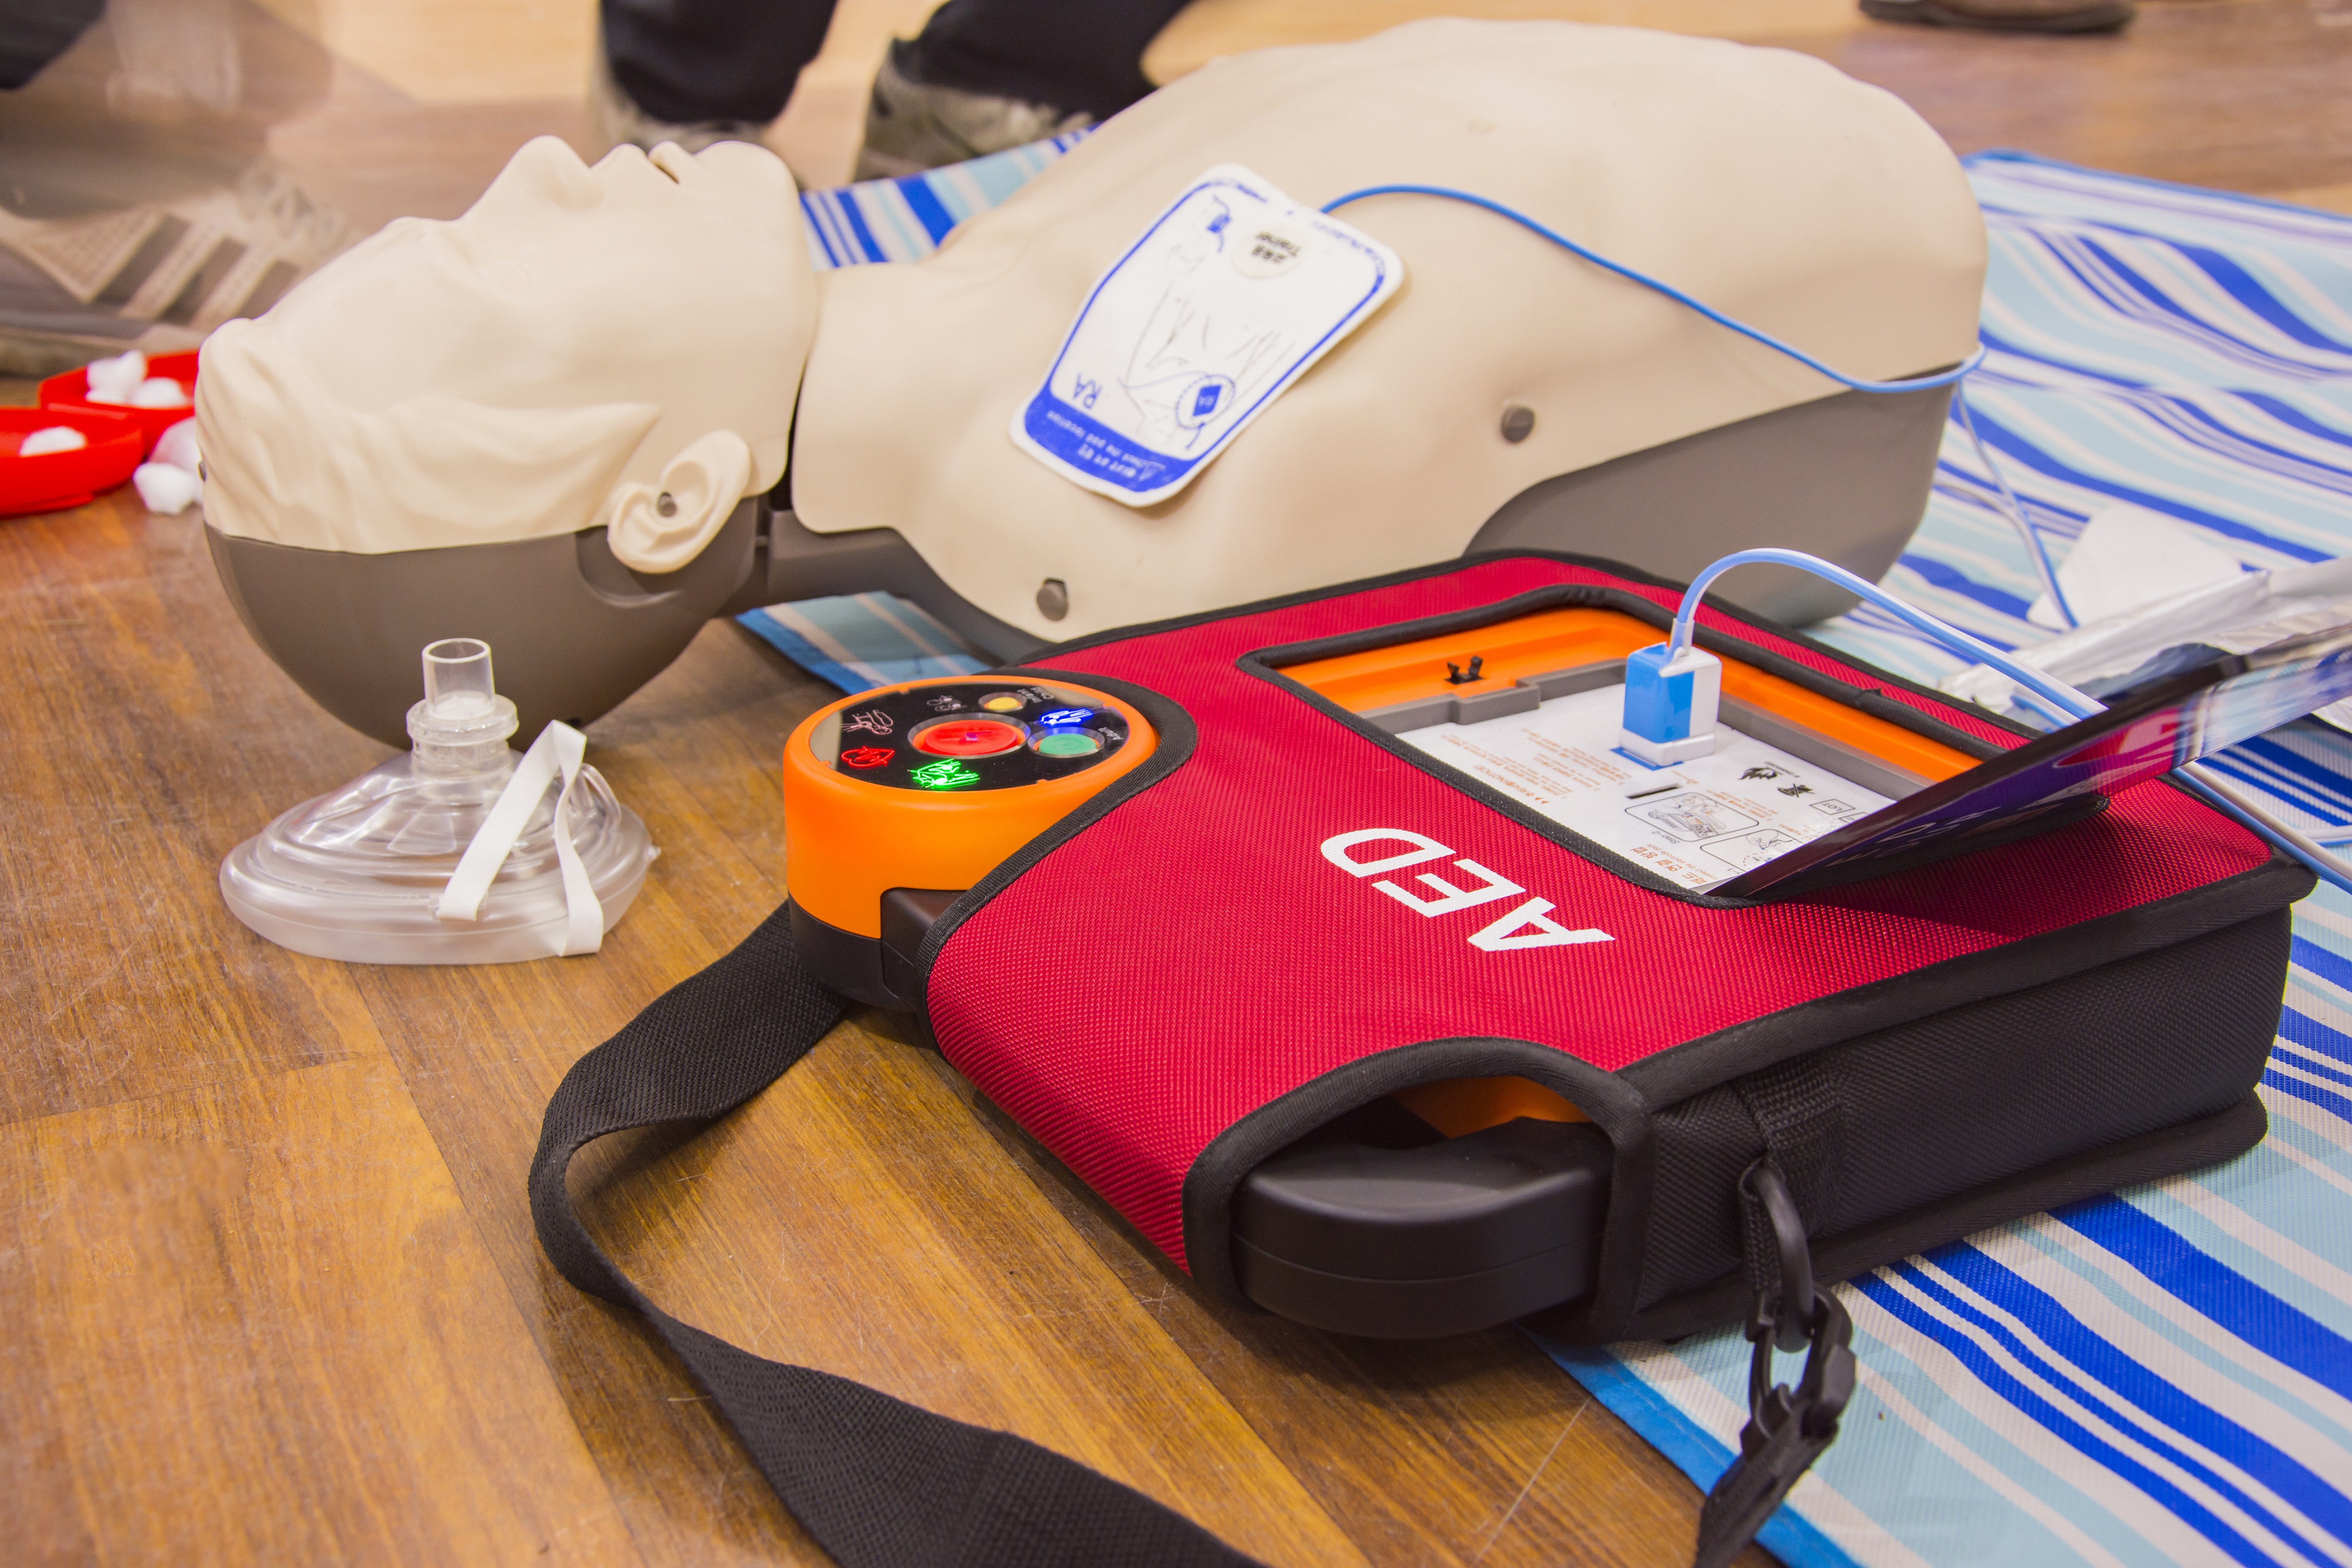 CPR AED First Aid Training Class July 16, 2022 in Salem